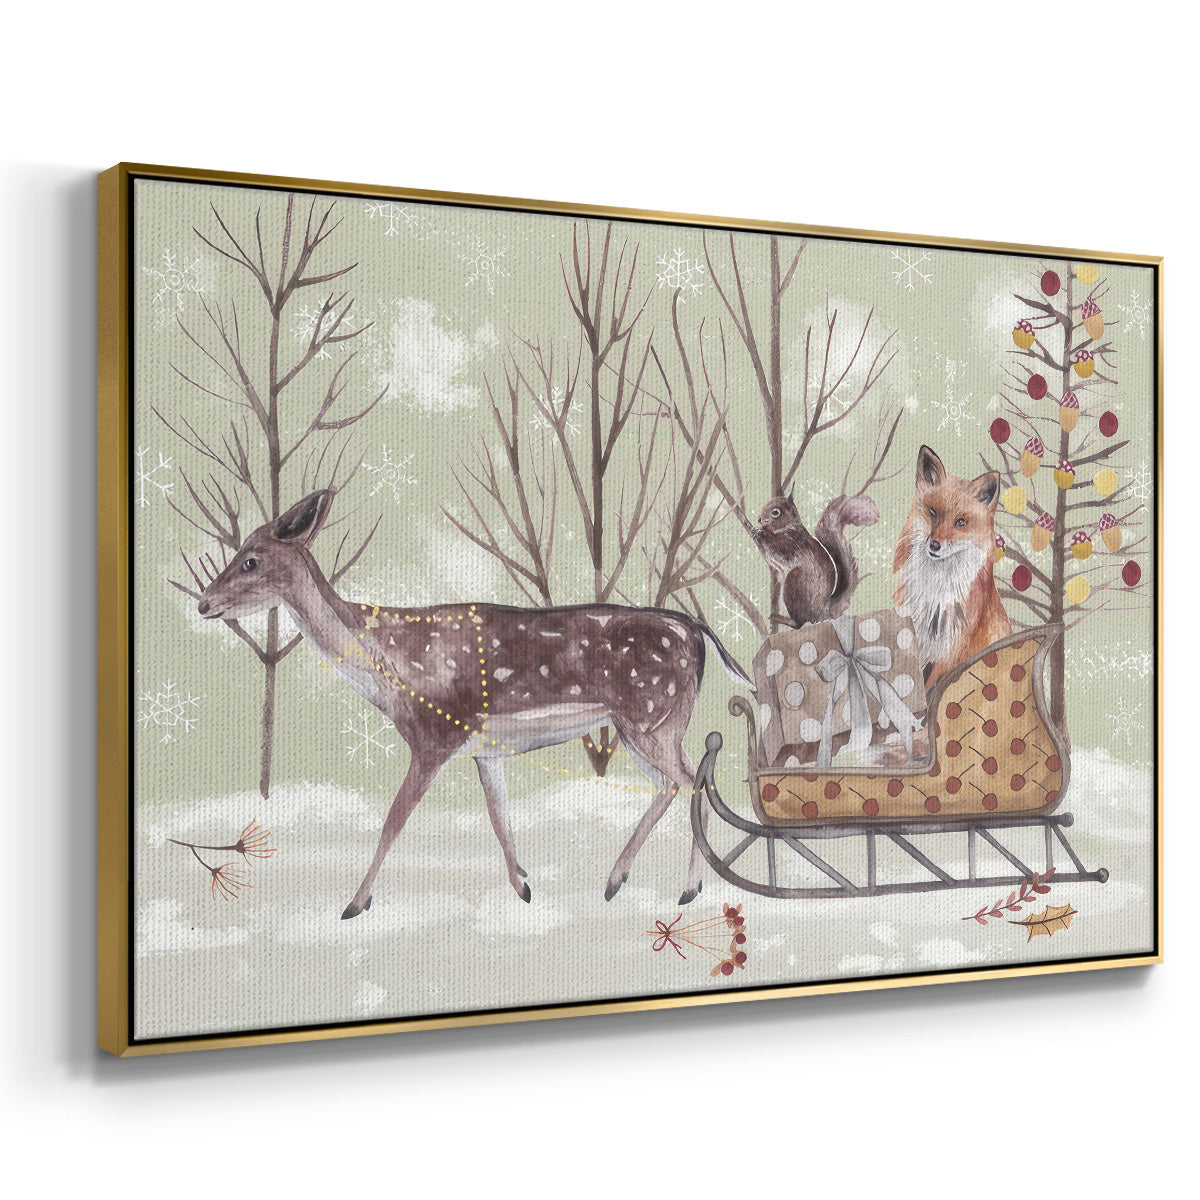 Christmas Time Collection A - Framed Gallery Wrapped Canvas in Floating Frame